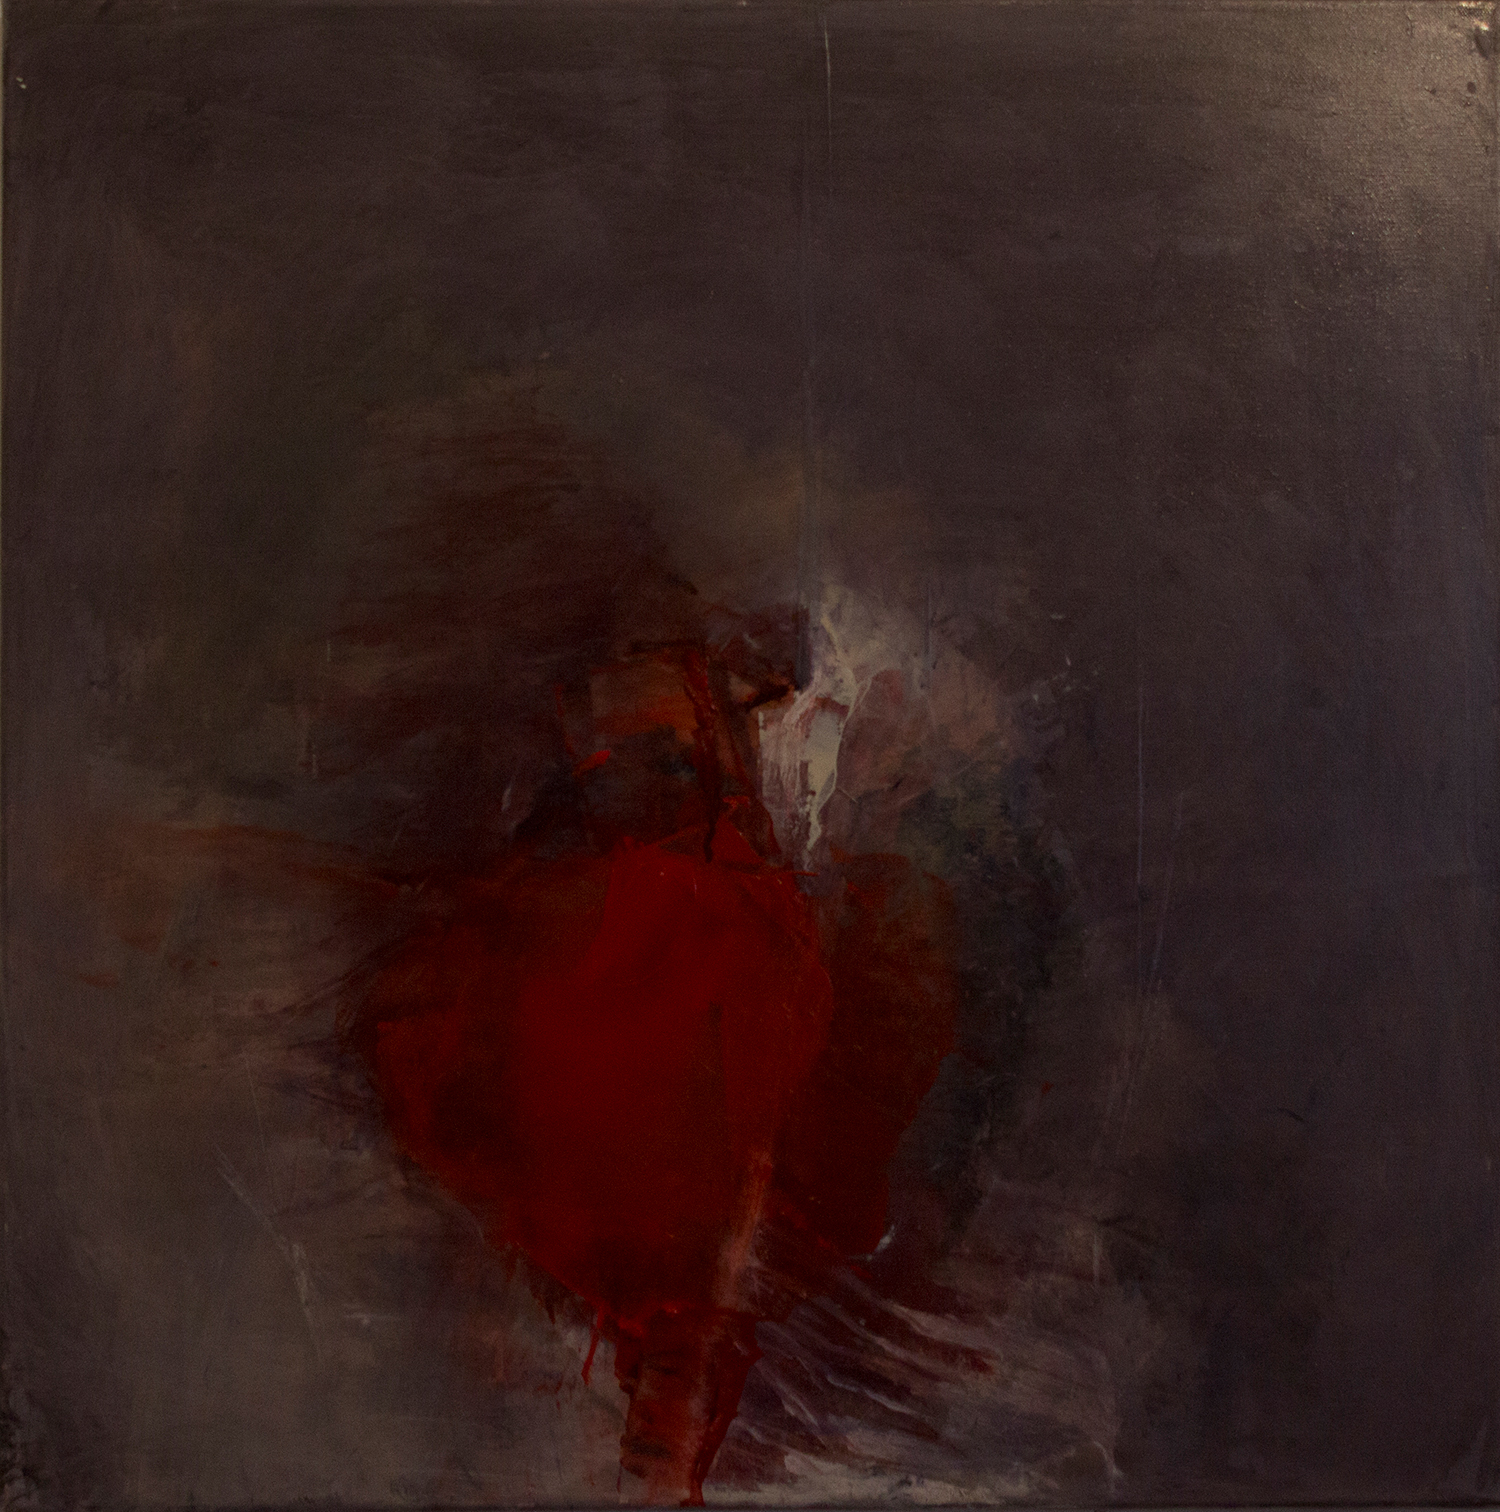 Jules Allan - Being 2 small red shape, 50cm x 50cm, oil on canvas